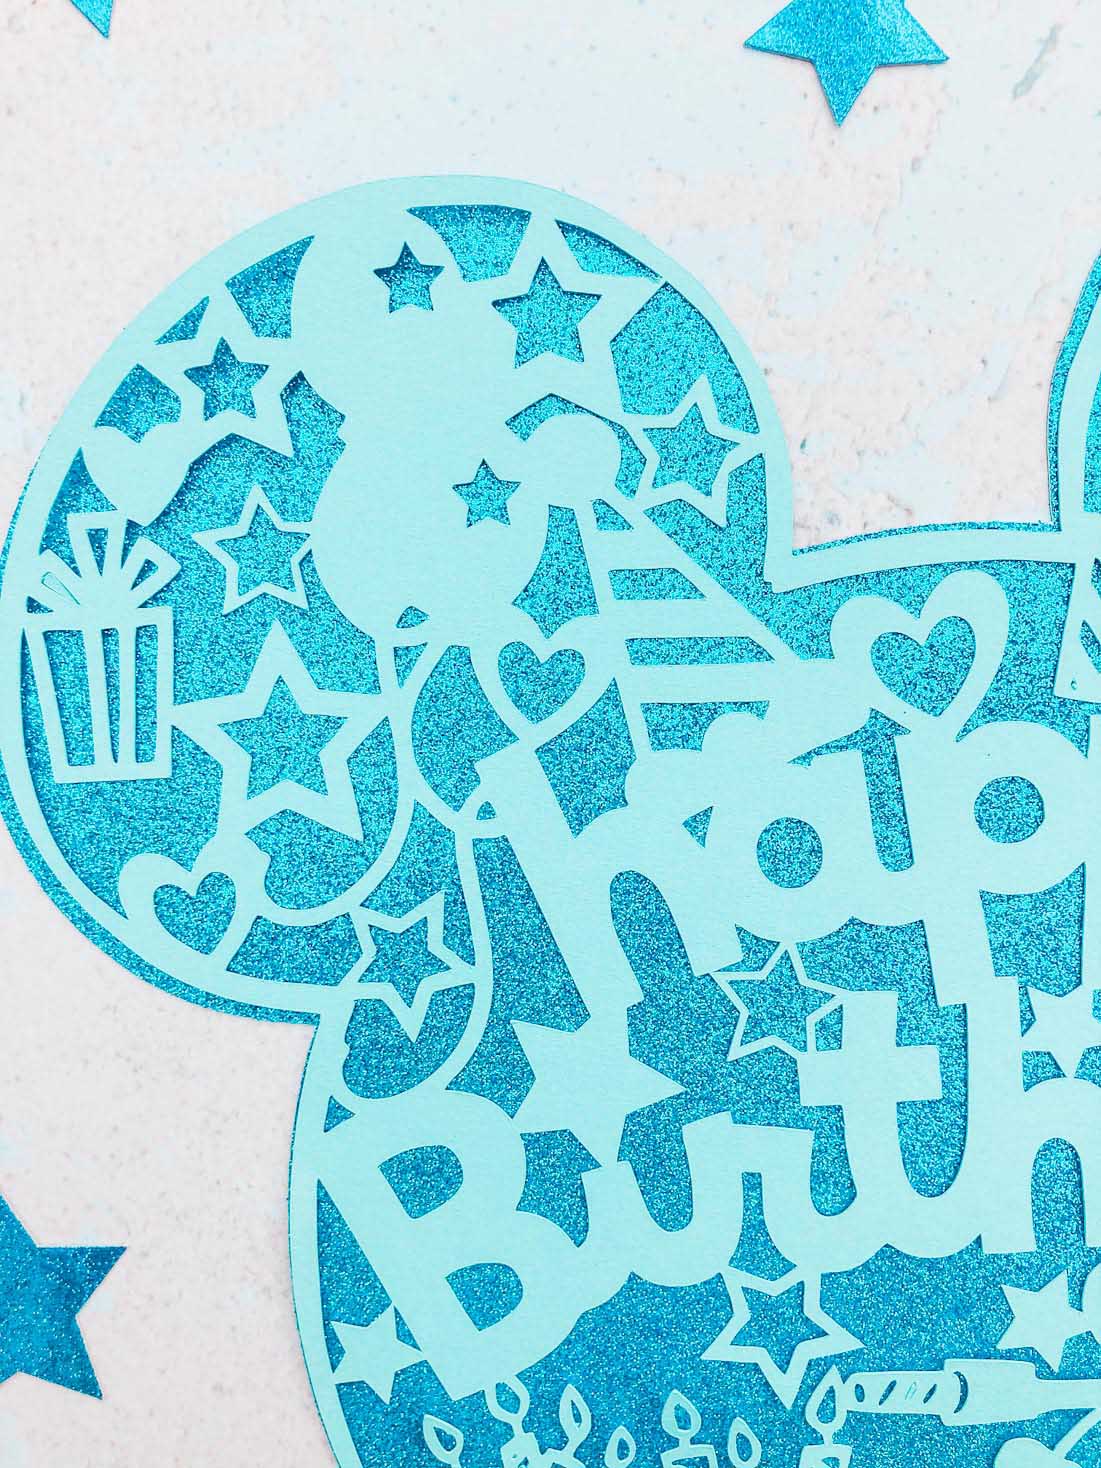 Downloadable Cricut Mickey Mouse Happy Birthday cut file for scrapbooking, cake toppers and paper cutting